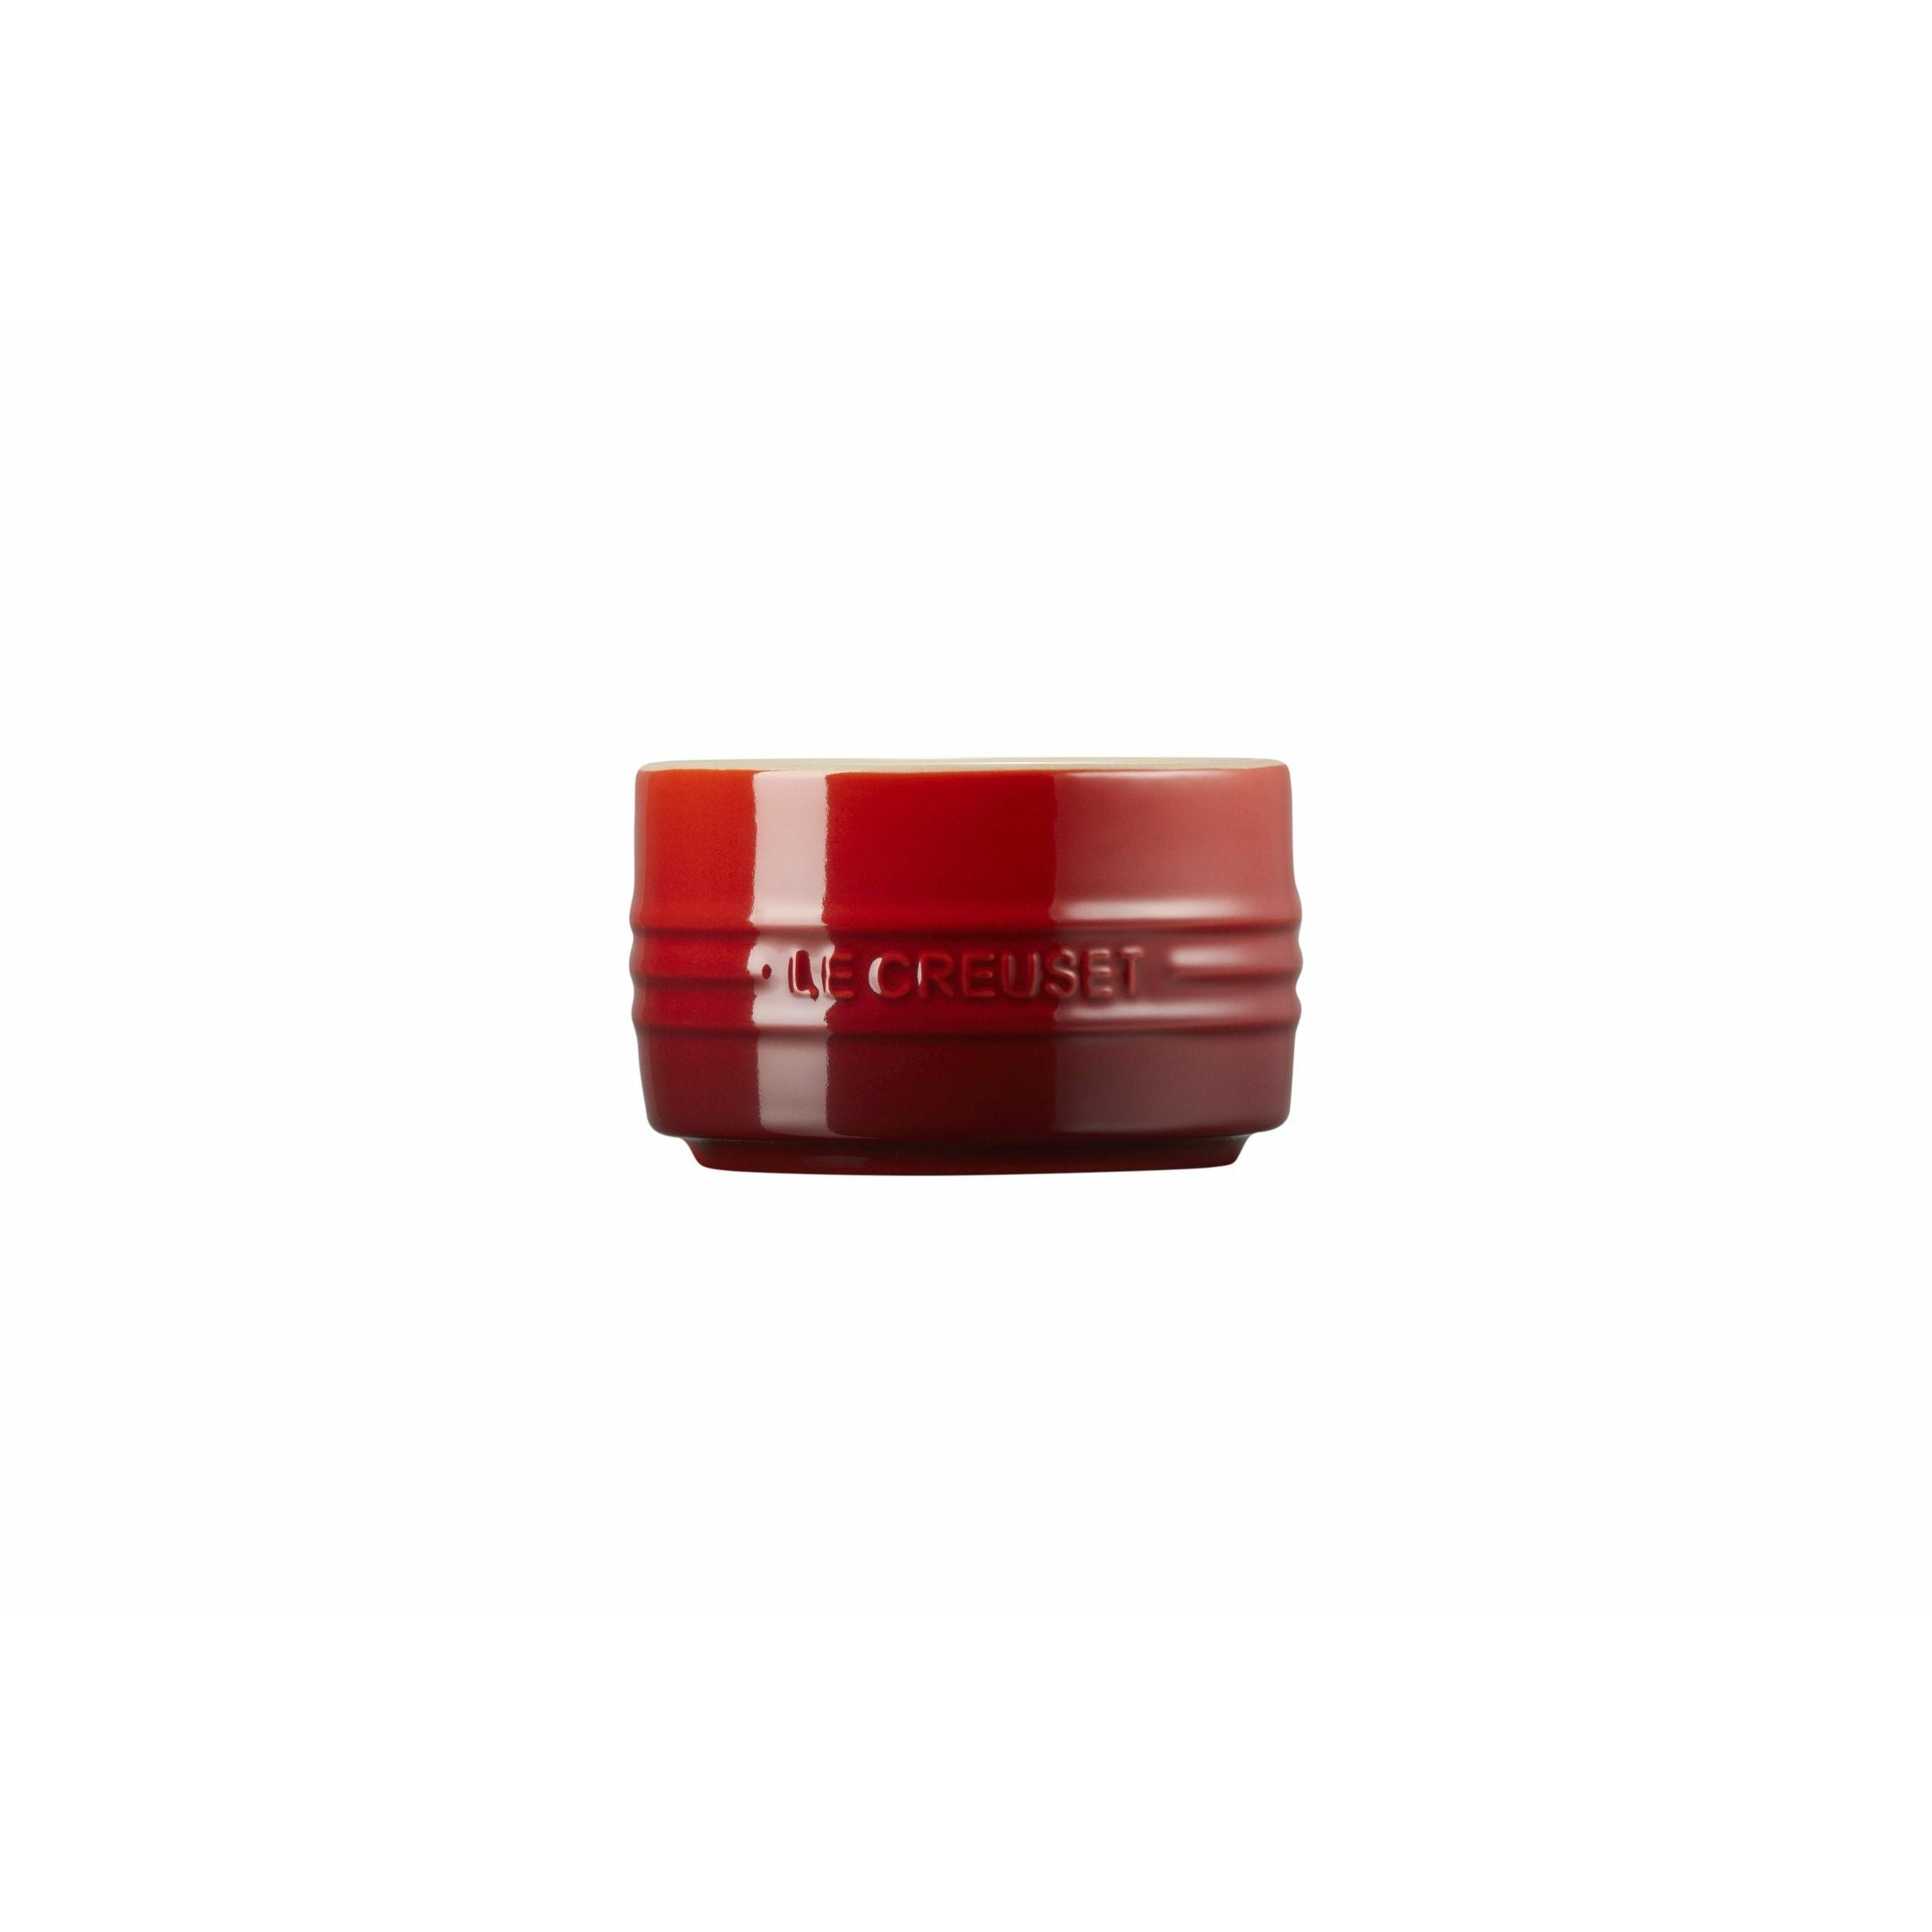 Le Creuset Stackable Mould, Cherry Red